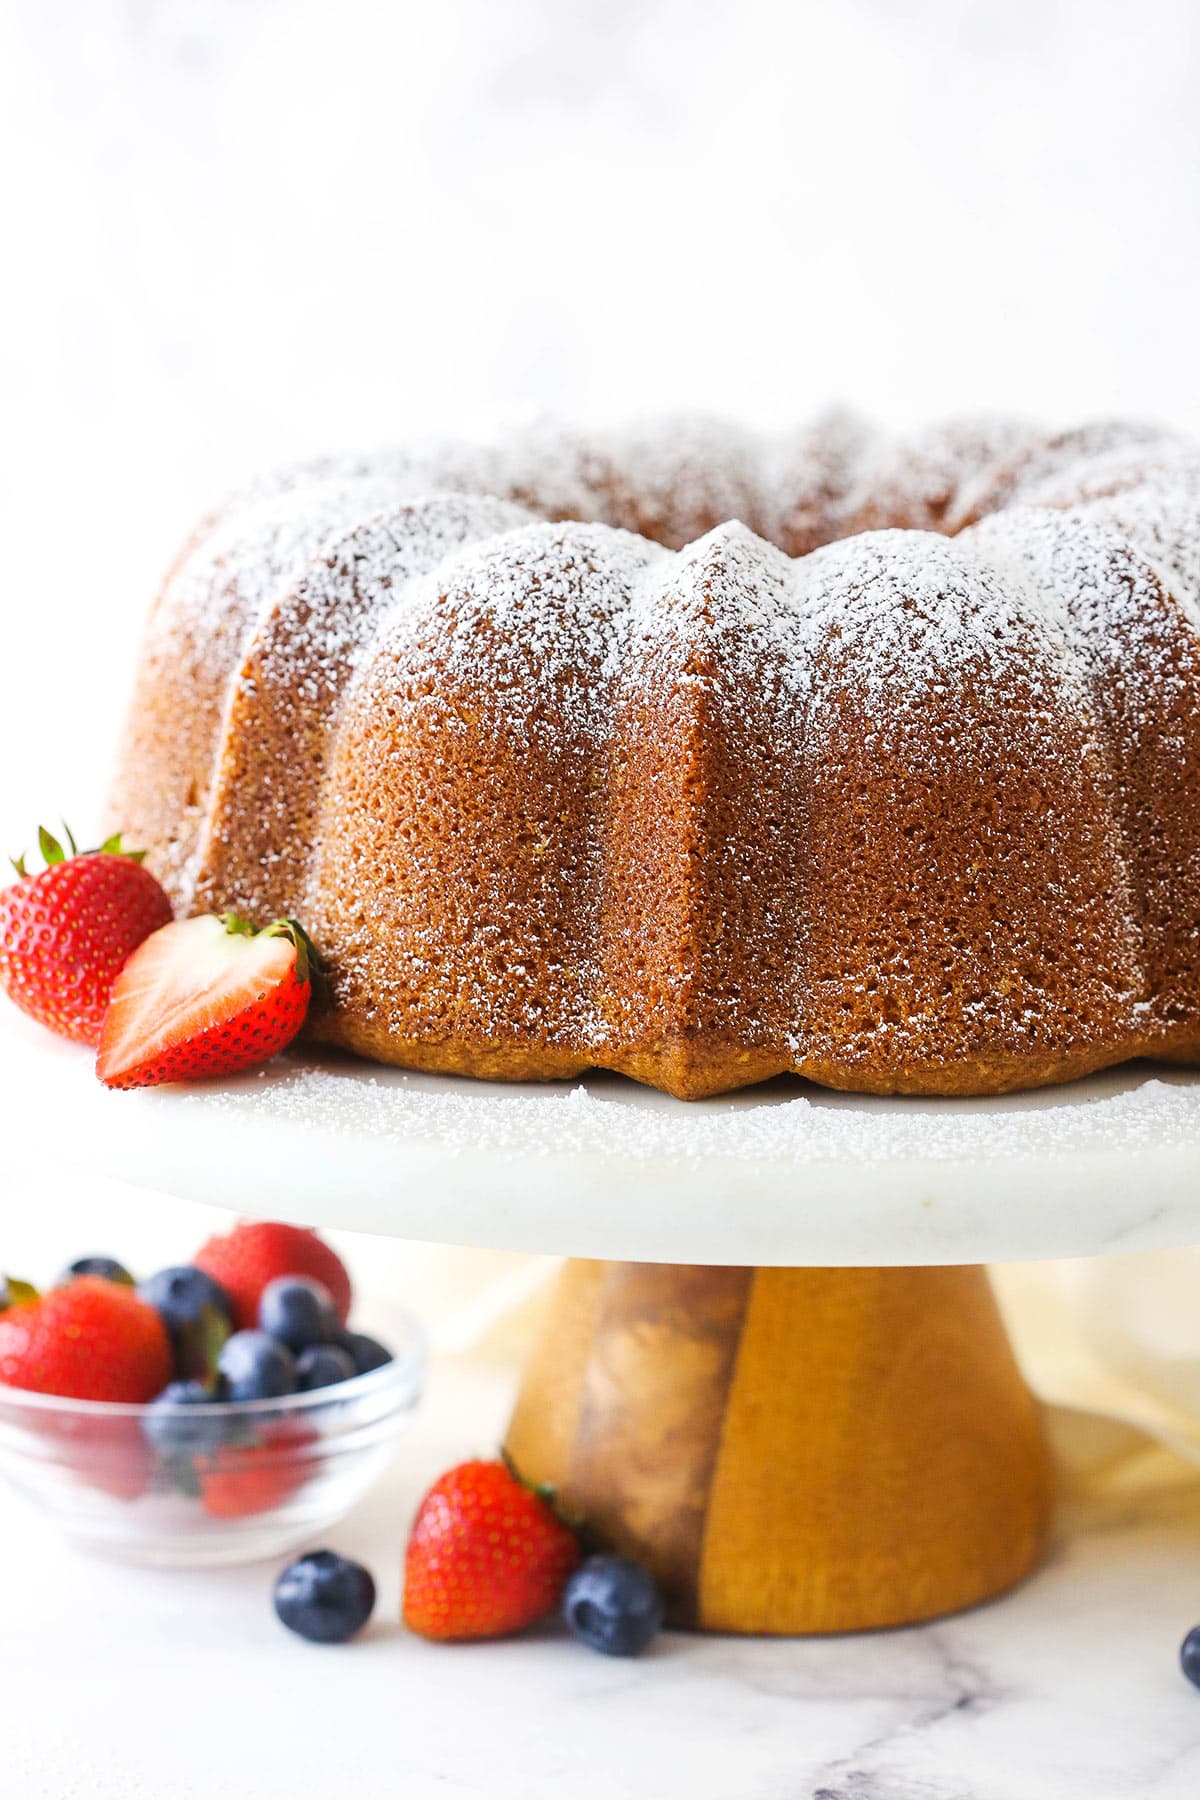 A bundt cake on a cake stand with a dusting of powdered sugar on top